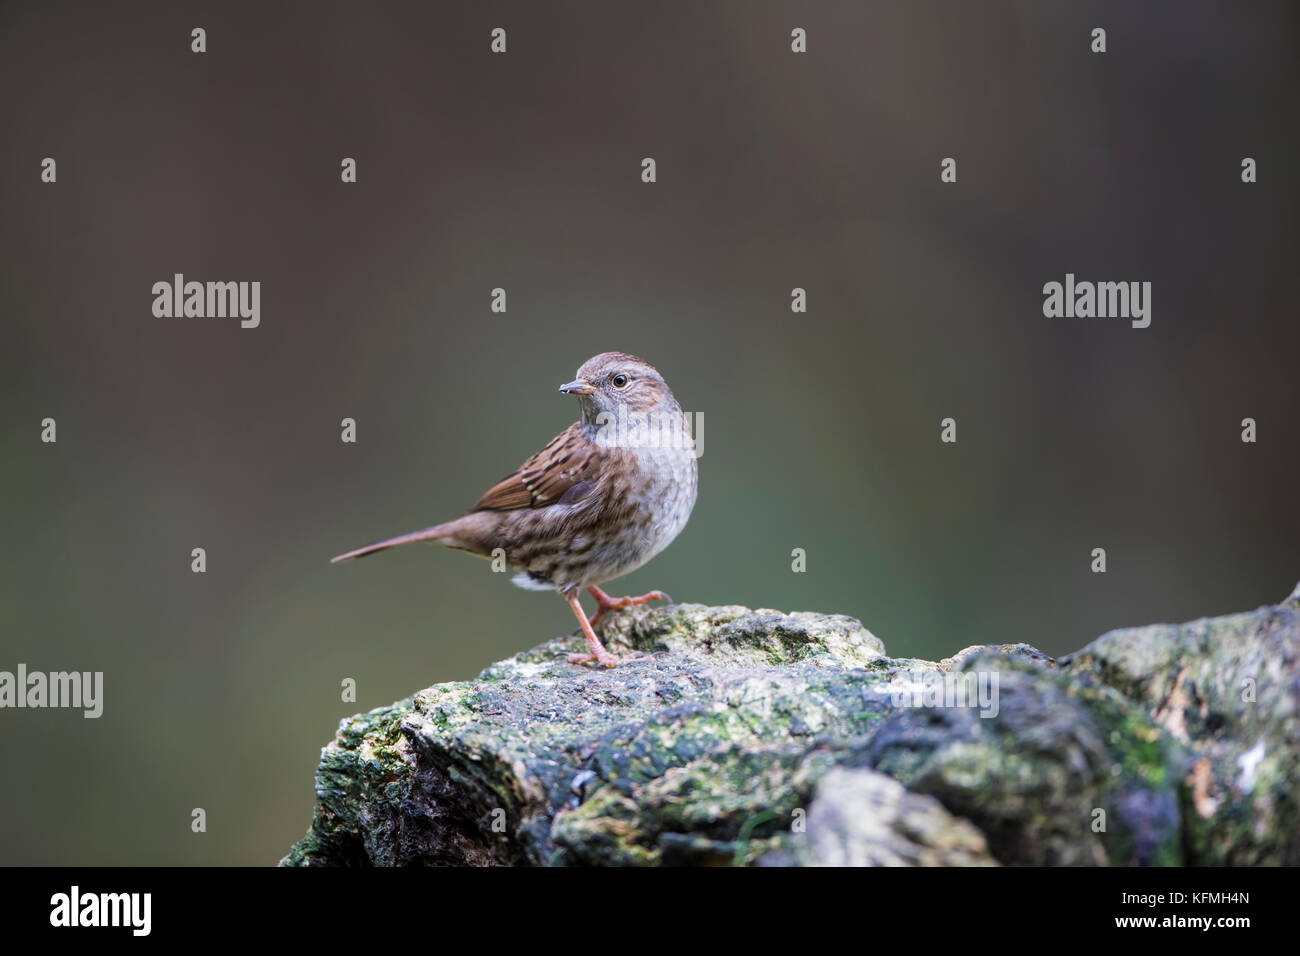 Dunnock Prunella modularis on a tree stump with a clean background Stock Photo